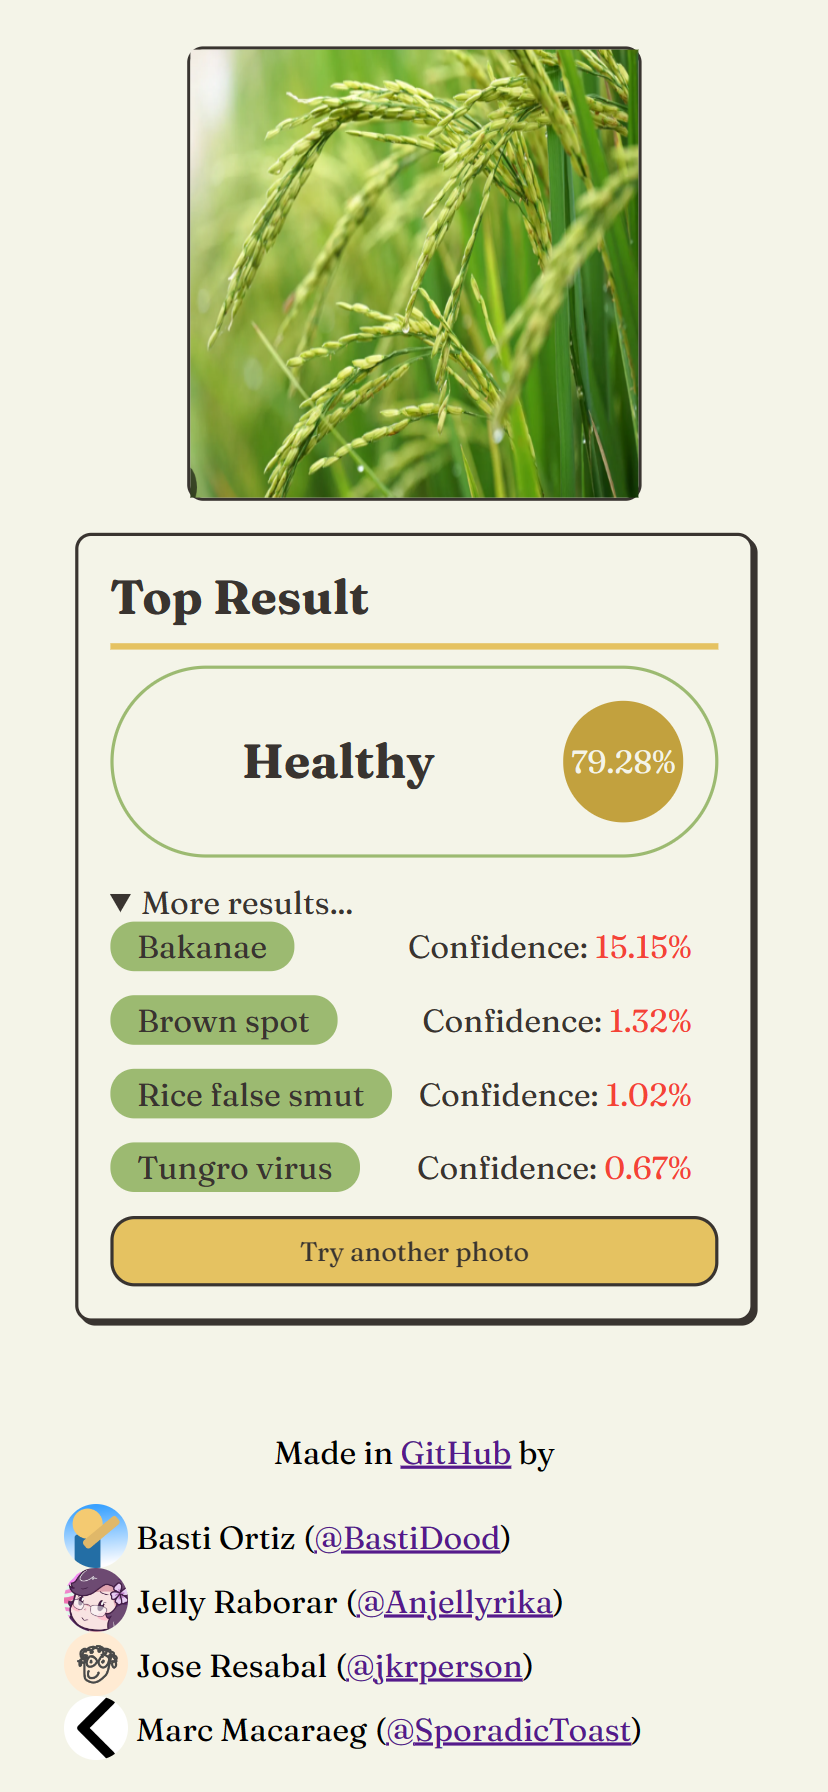 pal.ai results page showing 79.28% confidence in Healthy classification